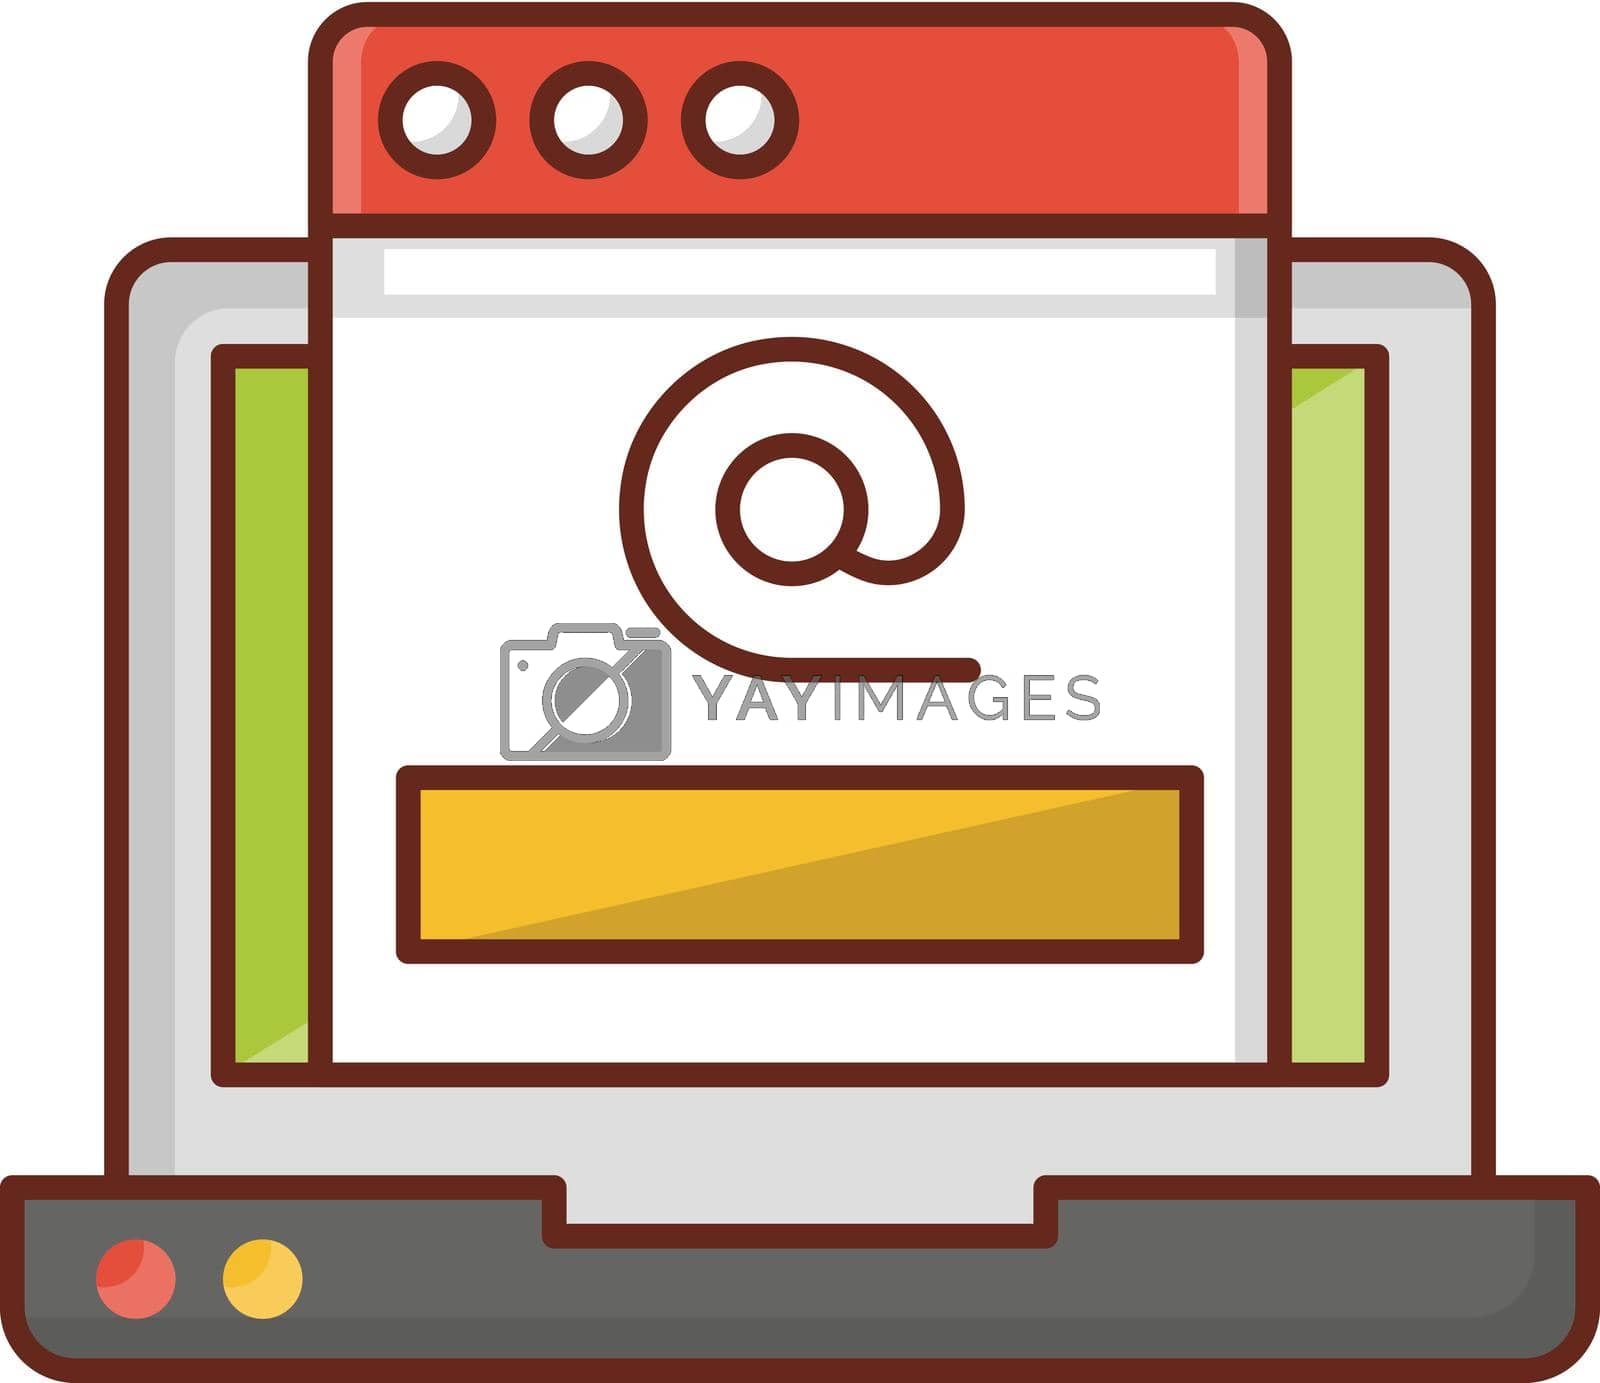 Royalty free image of email by FlaticonsDesign